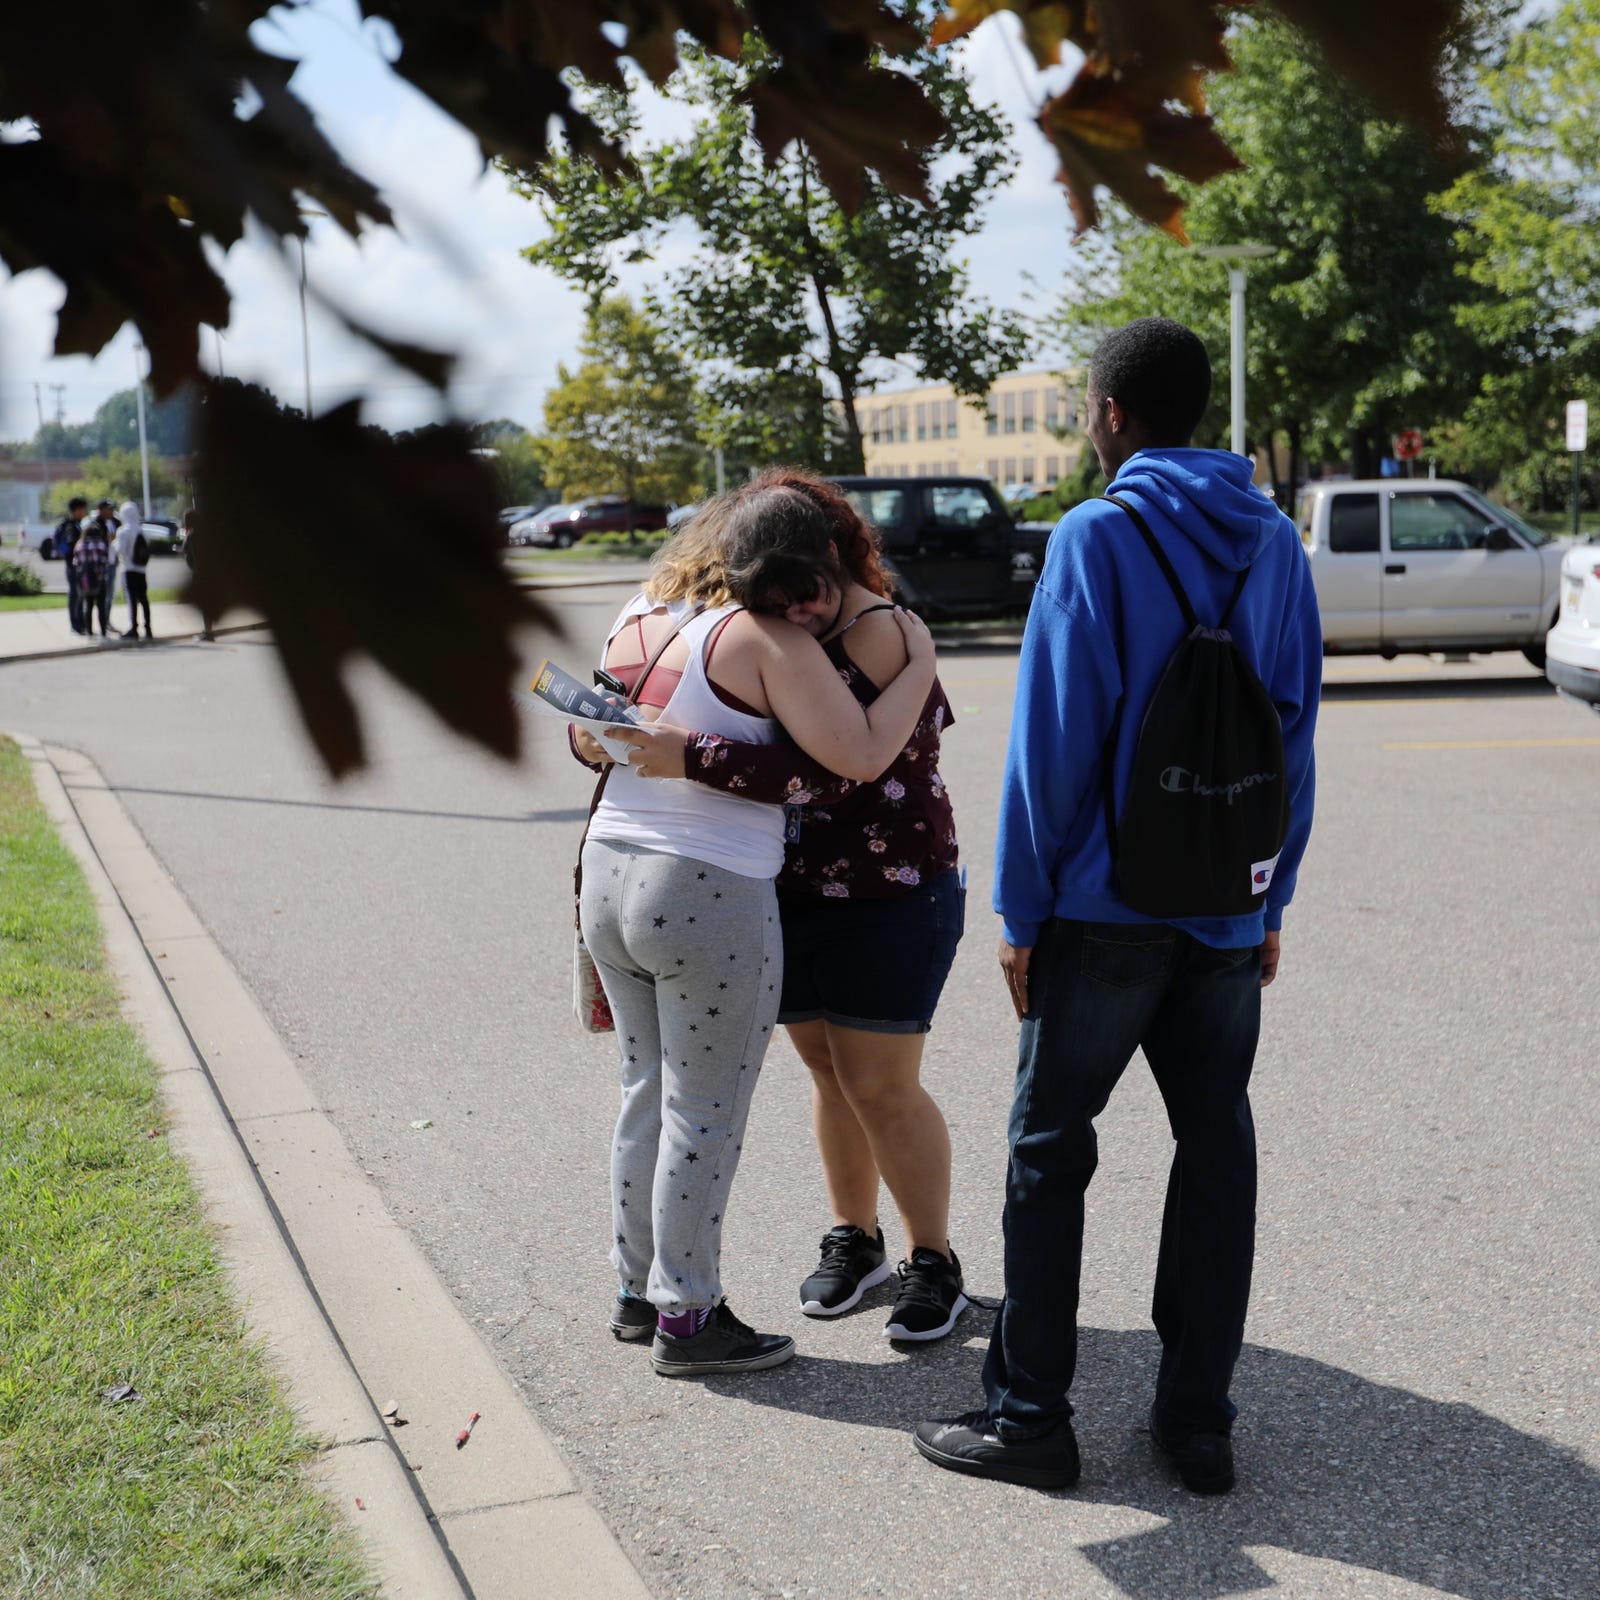 Victoria Oraczko, center, 16, of Warren is comforted by her friends after she was interviewed and released after the stabbing that occurred in her classroom at Fitzgerald High School in Warren, Mich. on Wednesday, Sept. 12, 2018.